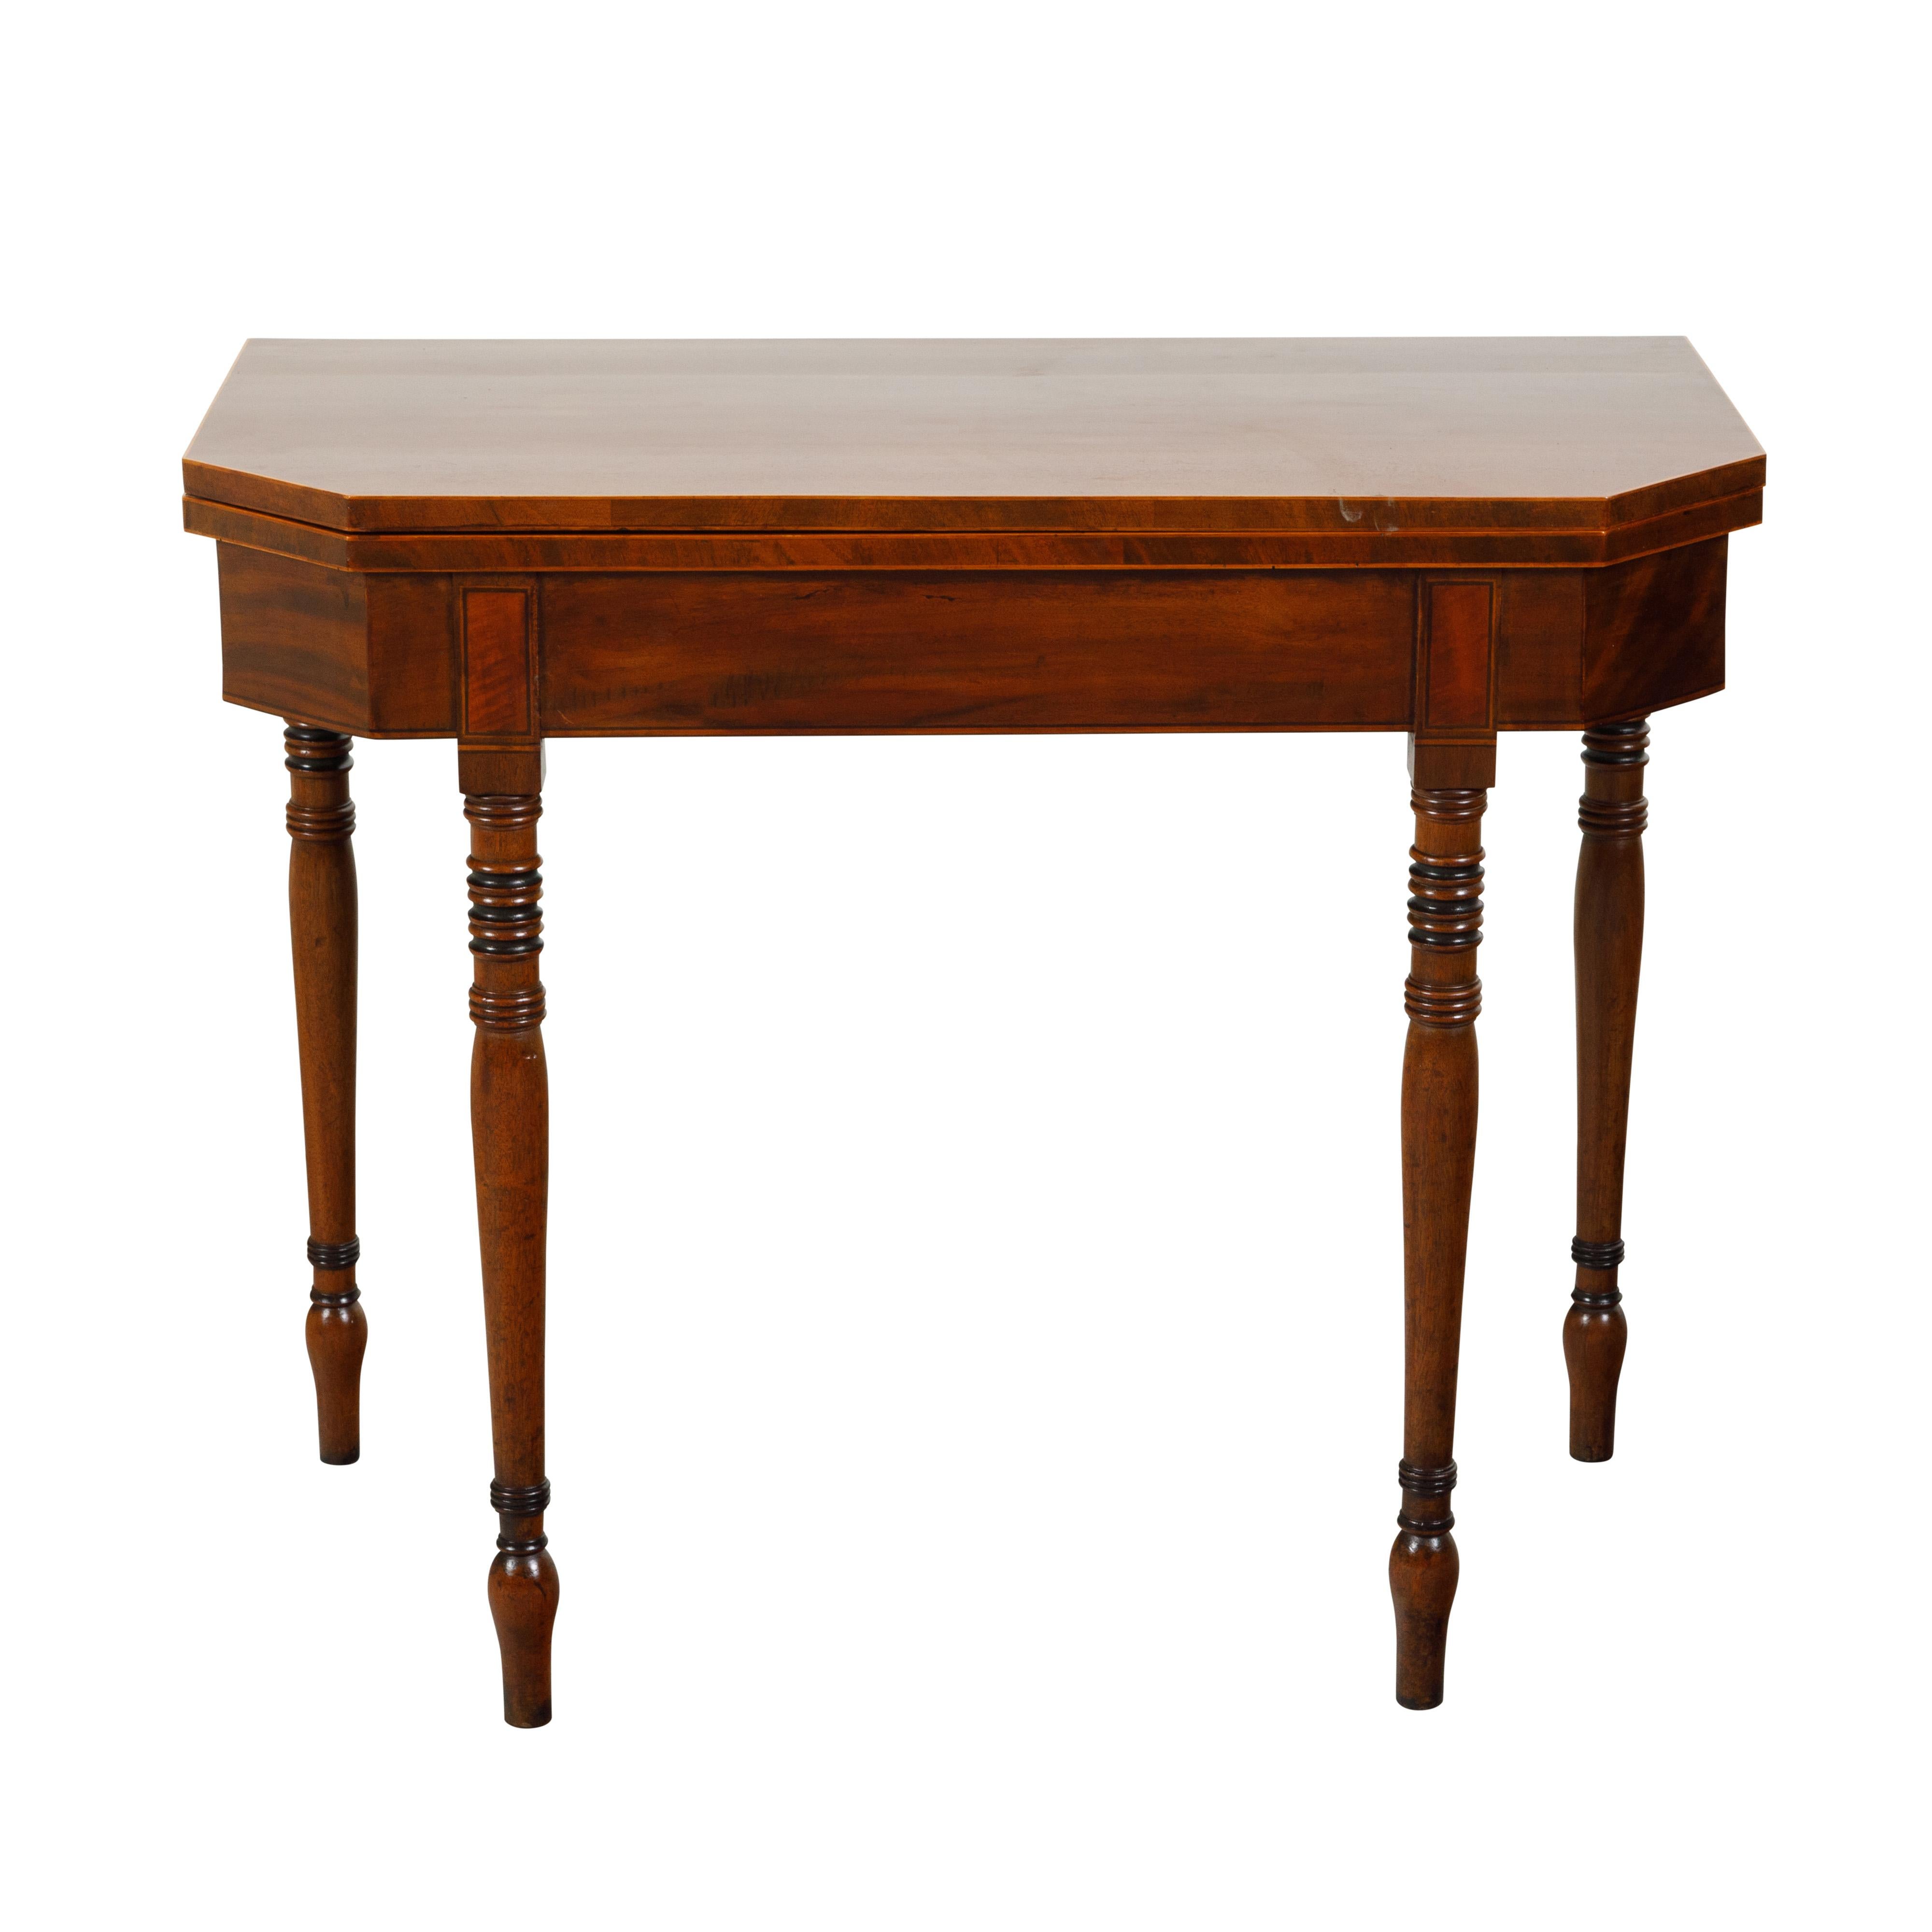 English Regency 1820s Lift Top Console Table with Turned Legs and Arrow Feet For Sale